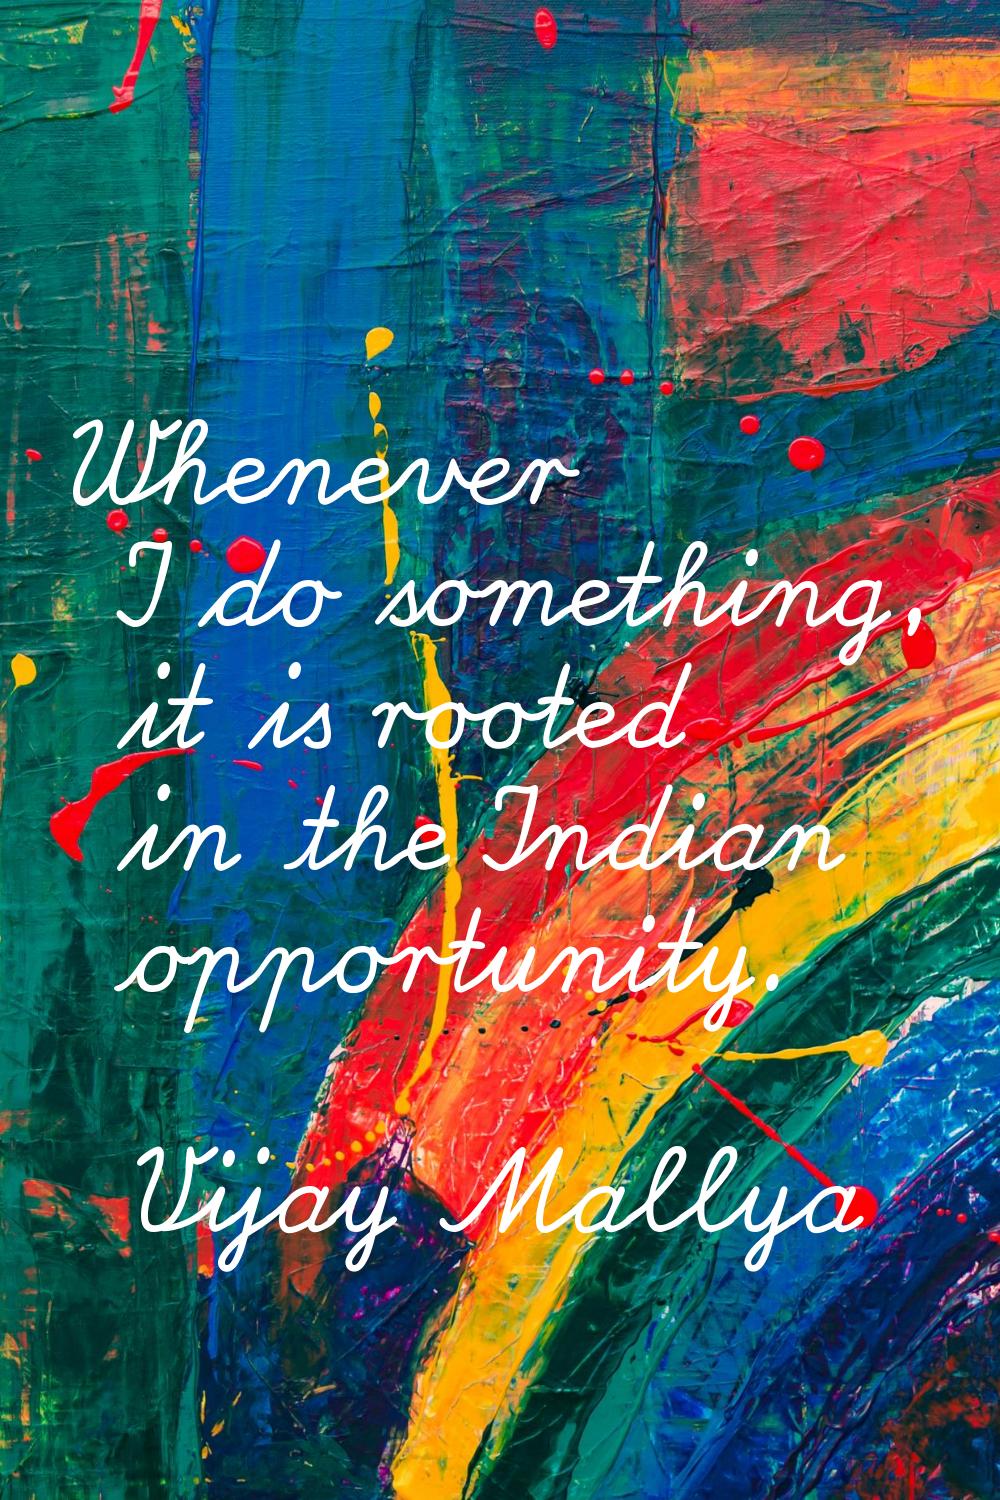 Whenever I do something, it is rooted in the Indian opportunity.